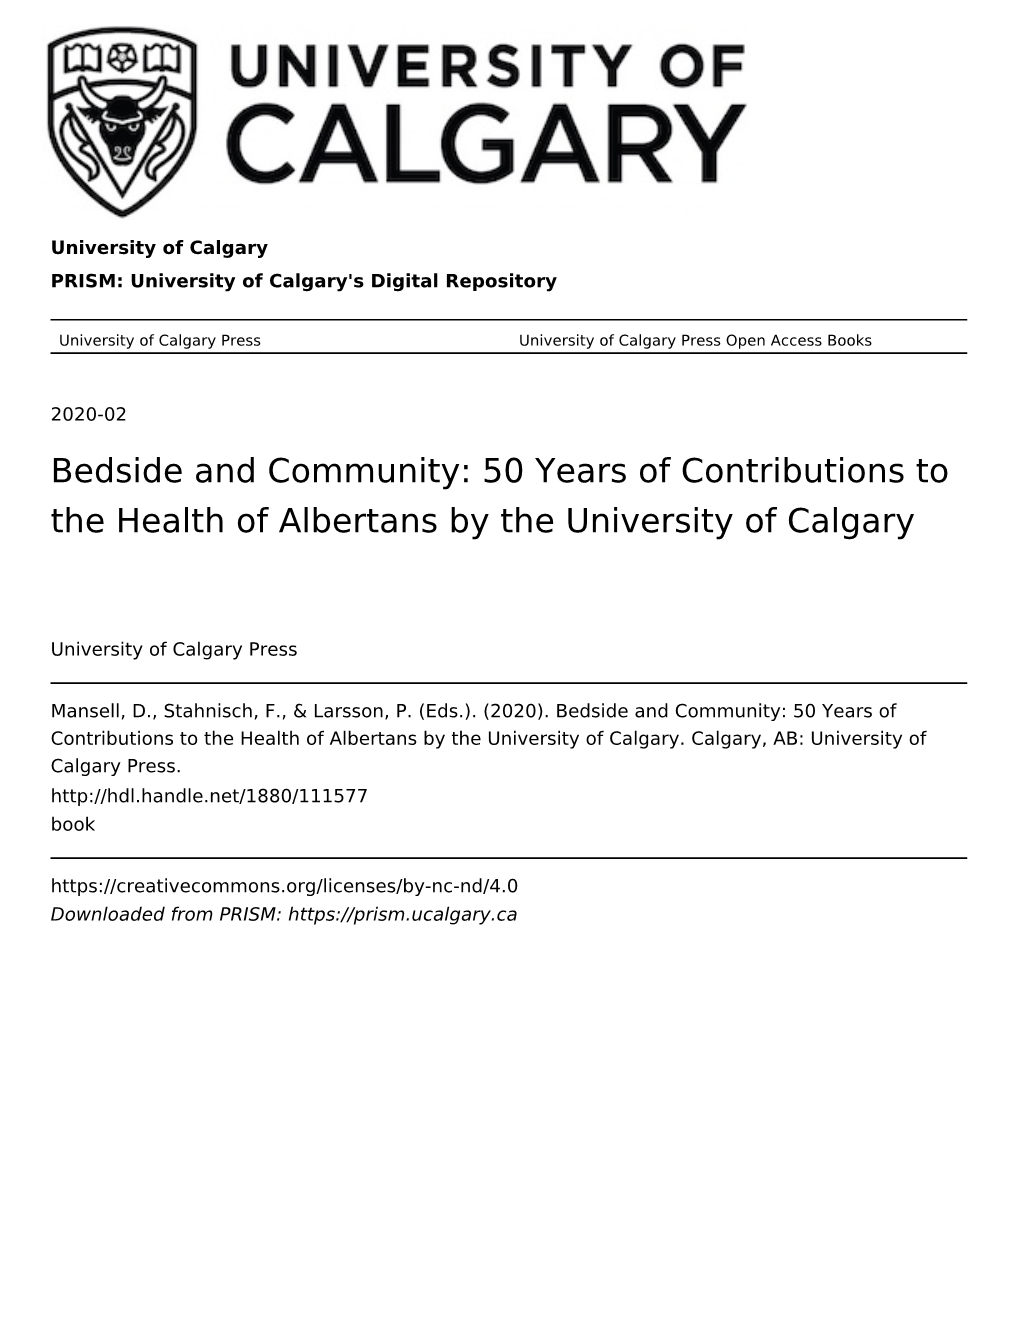 “Then” and “Now”: from Physical Education to Kinesiology at the University of Calgary